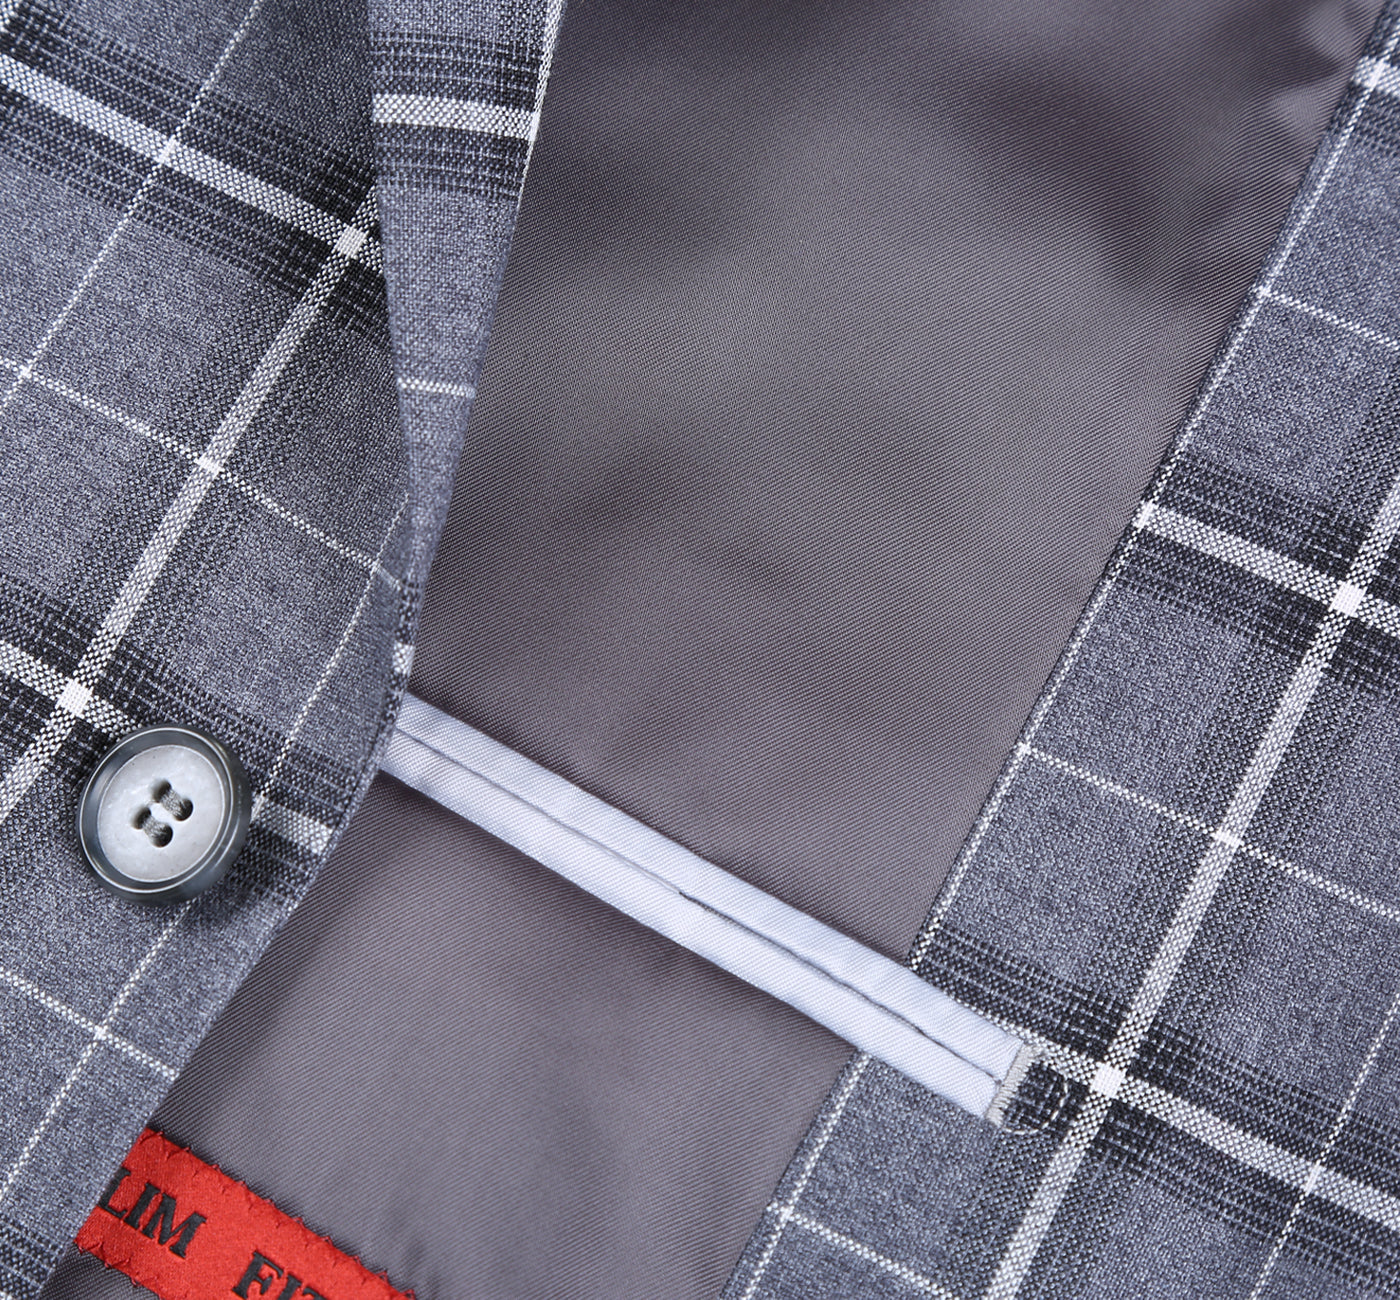 Stretch Performance 2-Button CLASSIC FIT Suit in Grey and White Check (Short, Regular, and Long Available) by Renoir